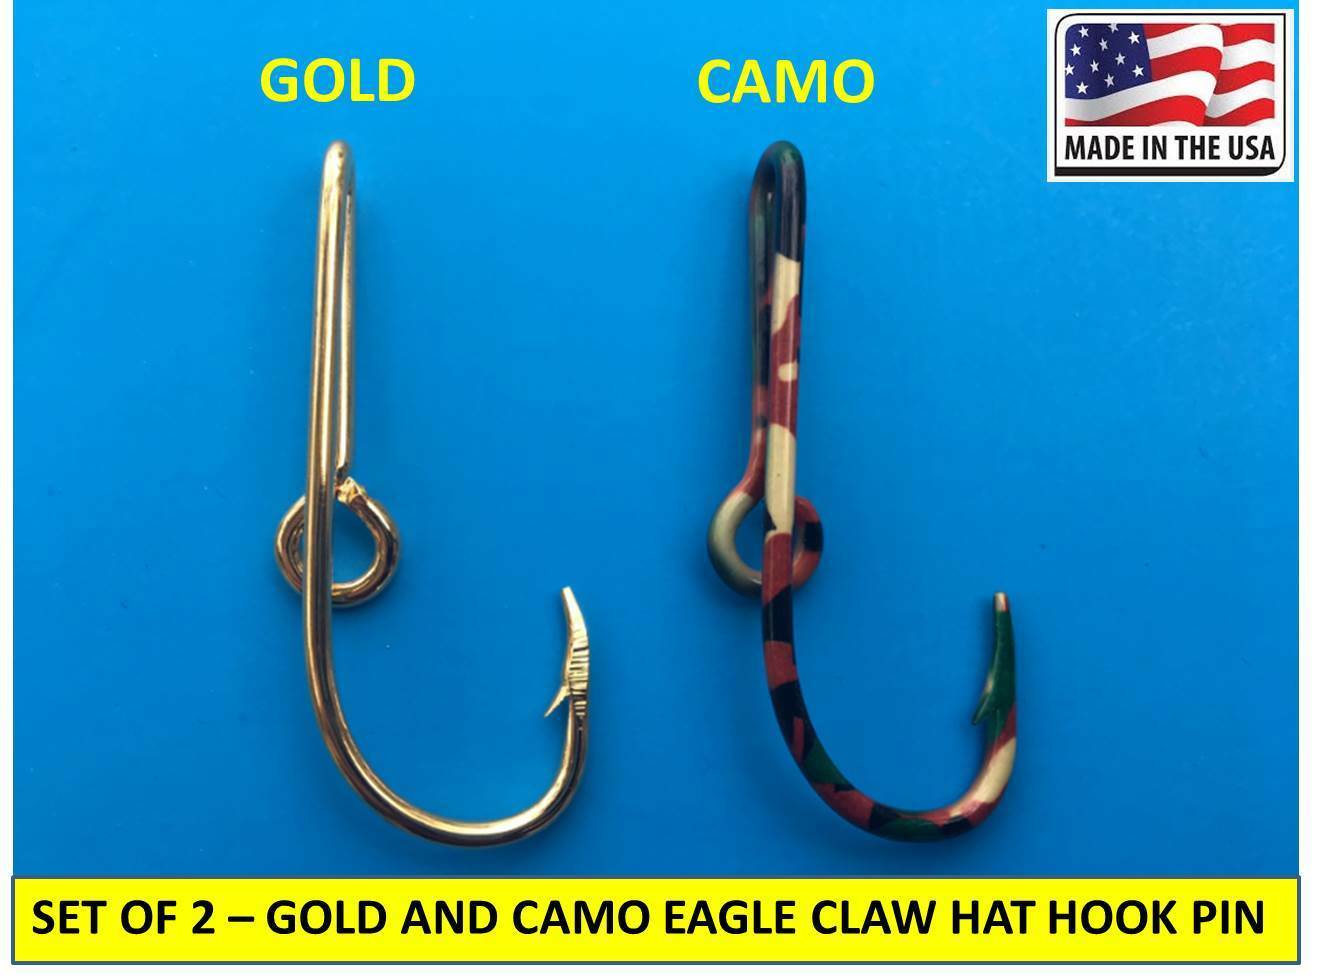 Gold-plated + Camo Hooks Eagle Claw Fish Hook Hat Pin Money Clip - Set Of Two!